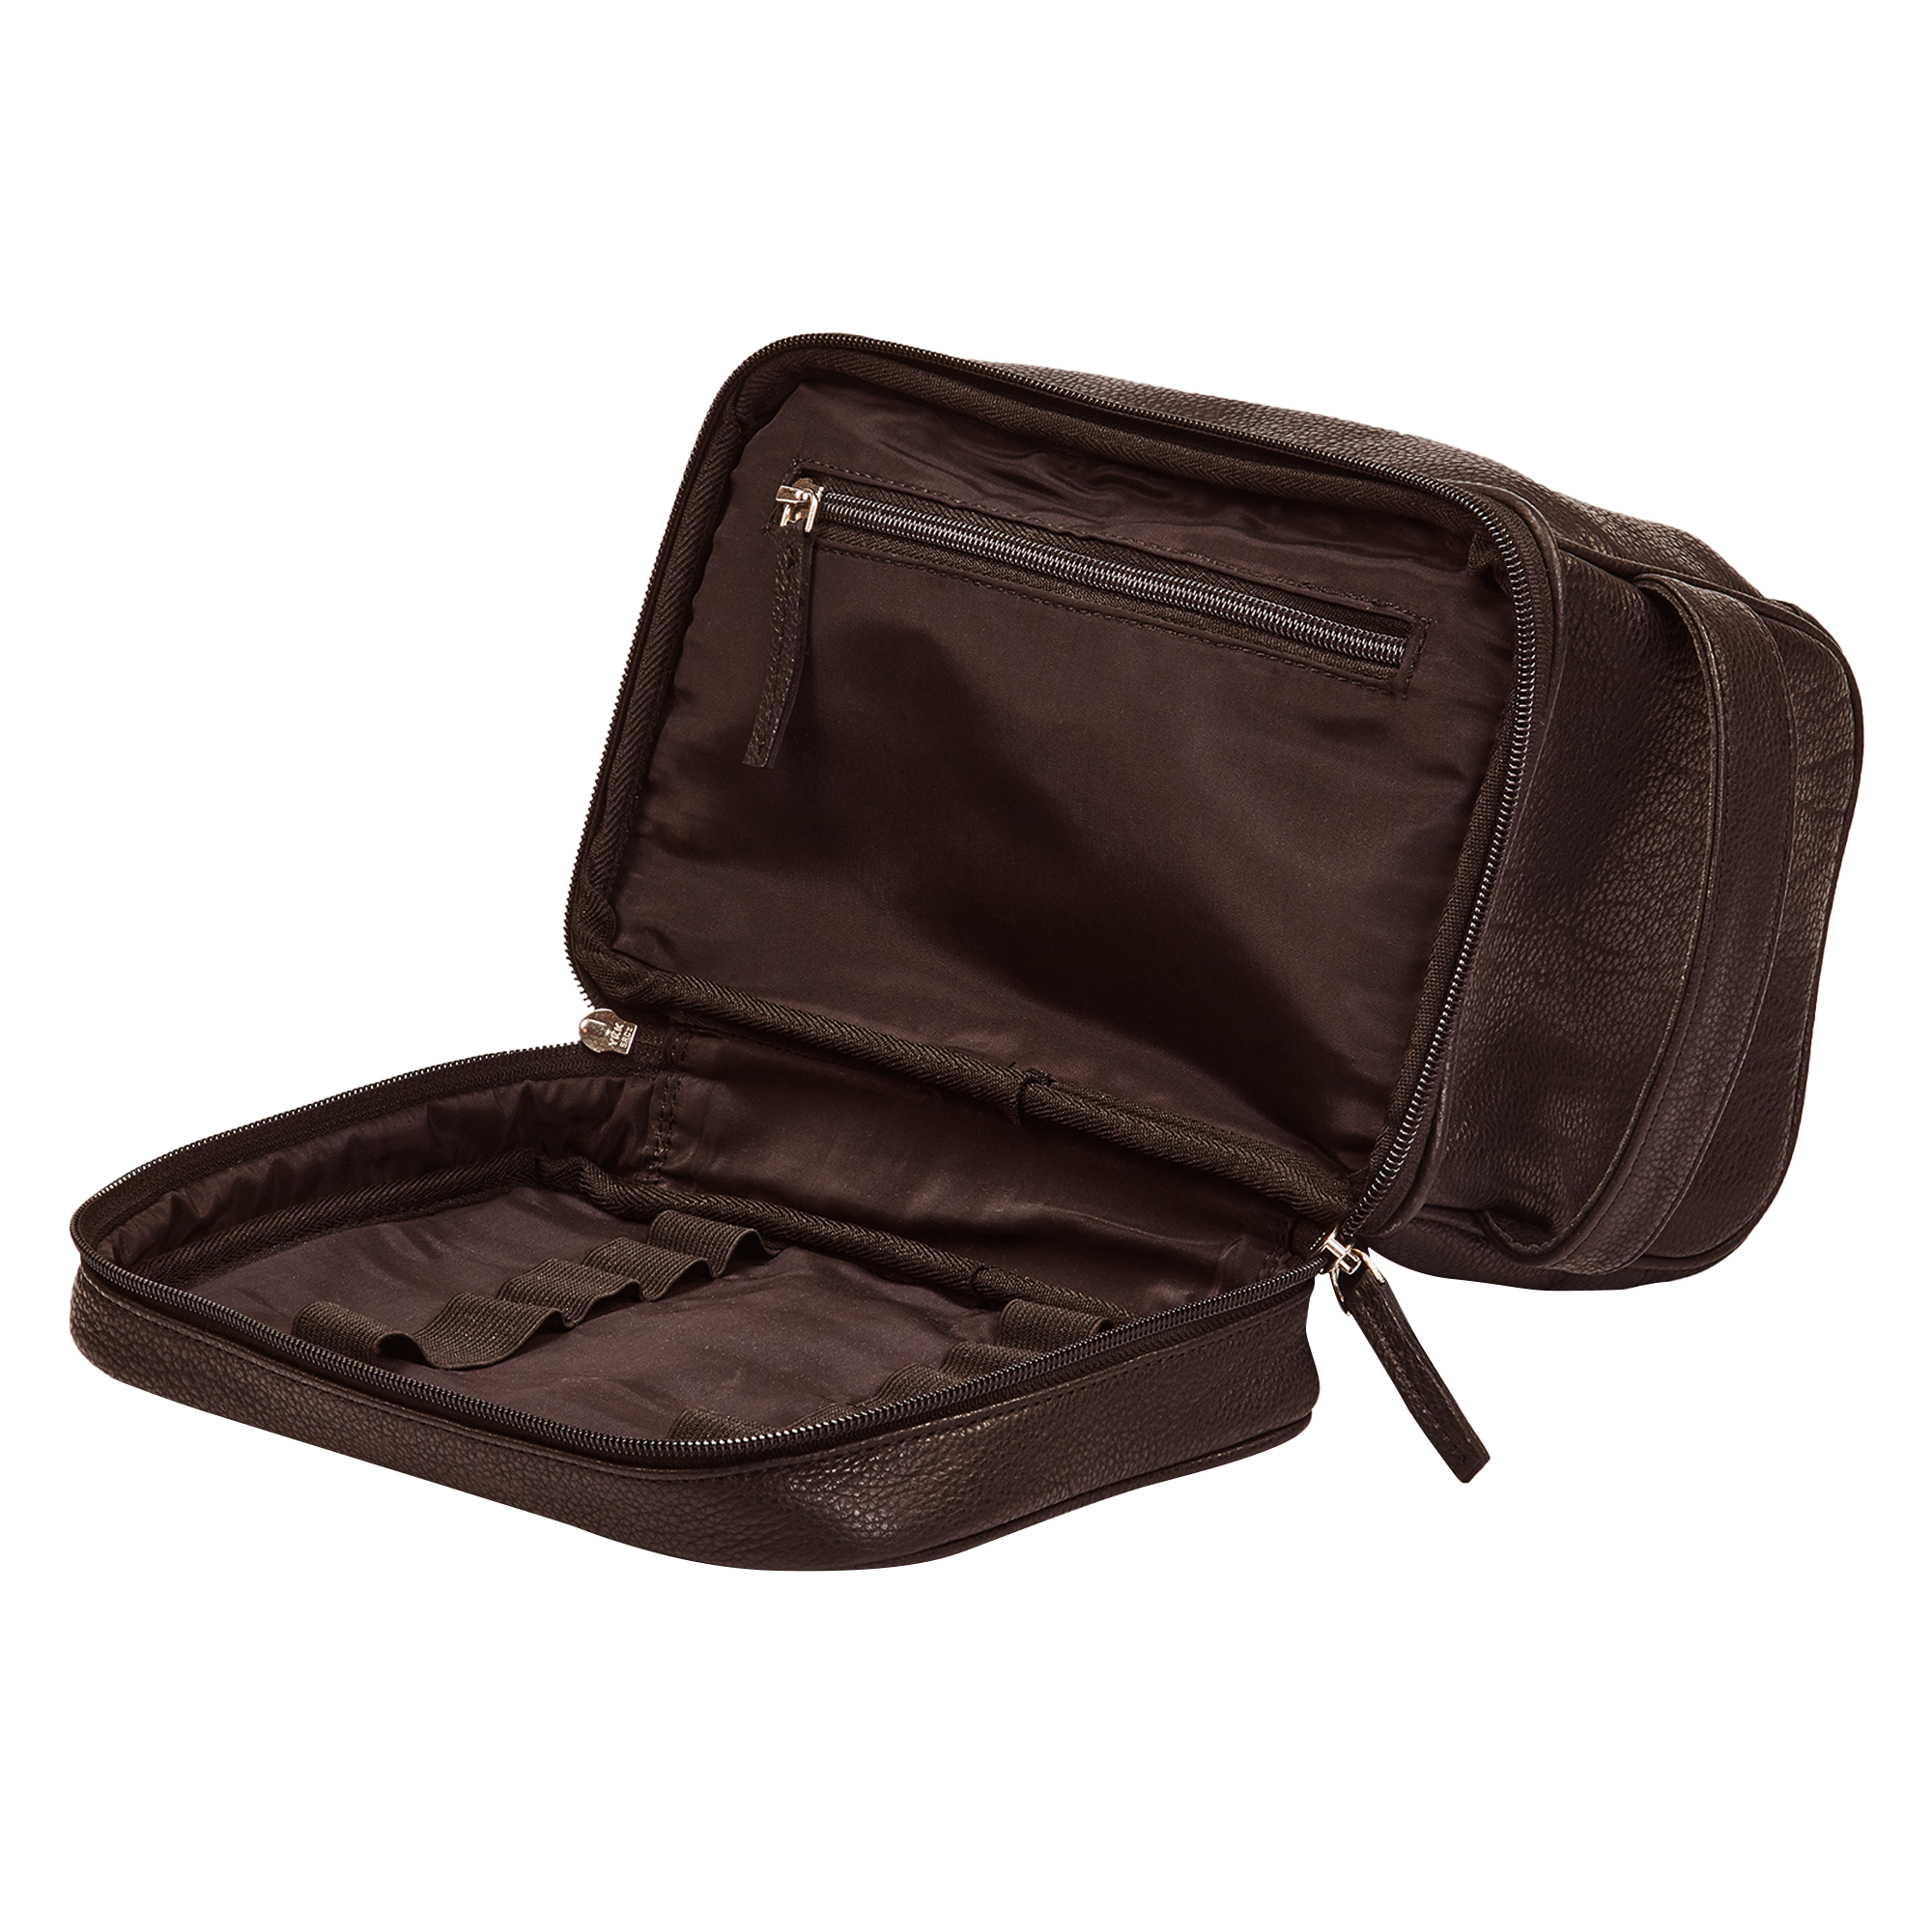 Leather Toiletry Bag Dopp Kit - Cocoa (X-Large Tall)